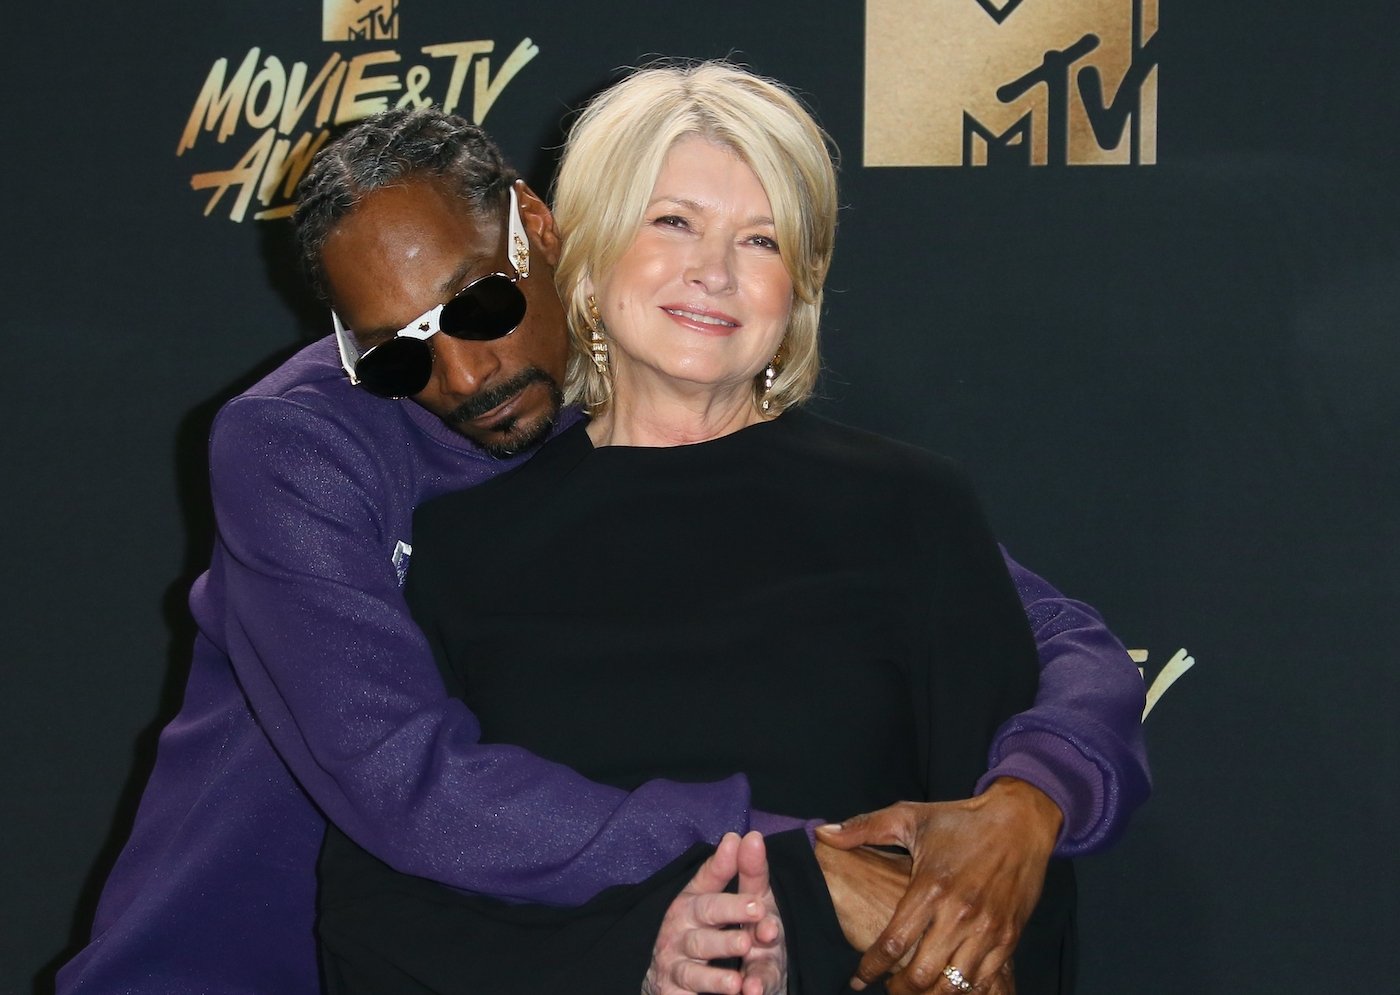 Snoop Dogg and Martha Stewart pose in the press room at the 2017 MTV Movie and TV Awards in May 2017 in Los Angeles